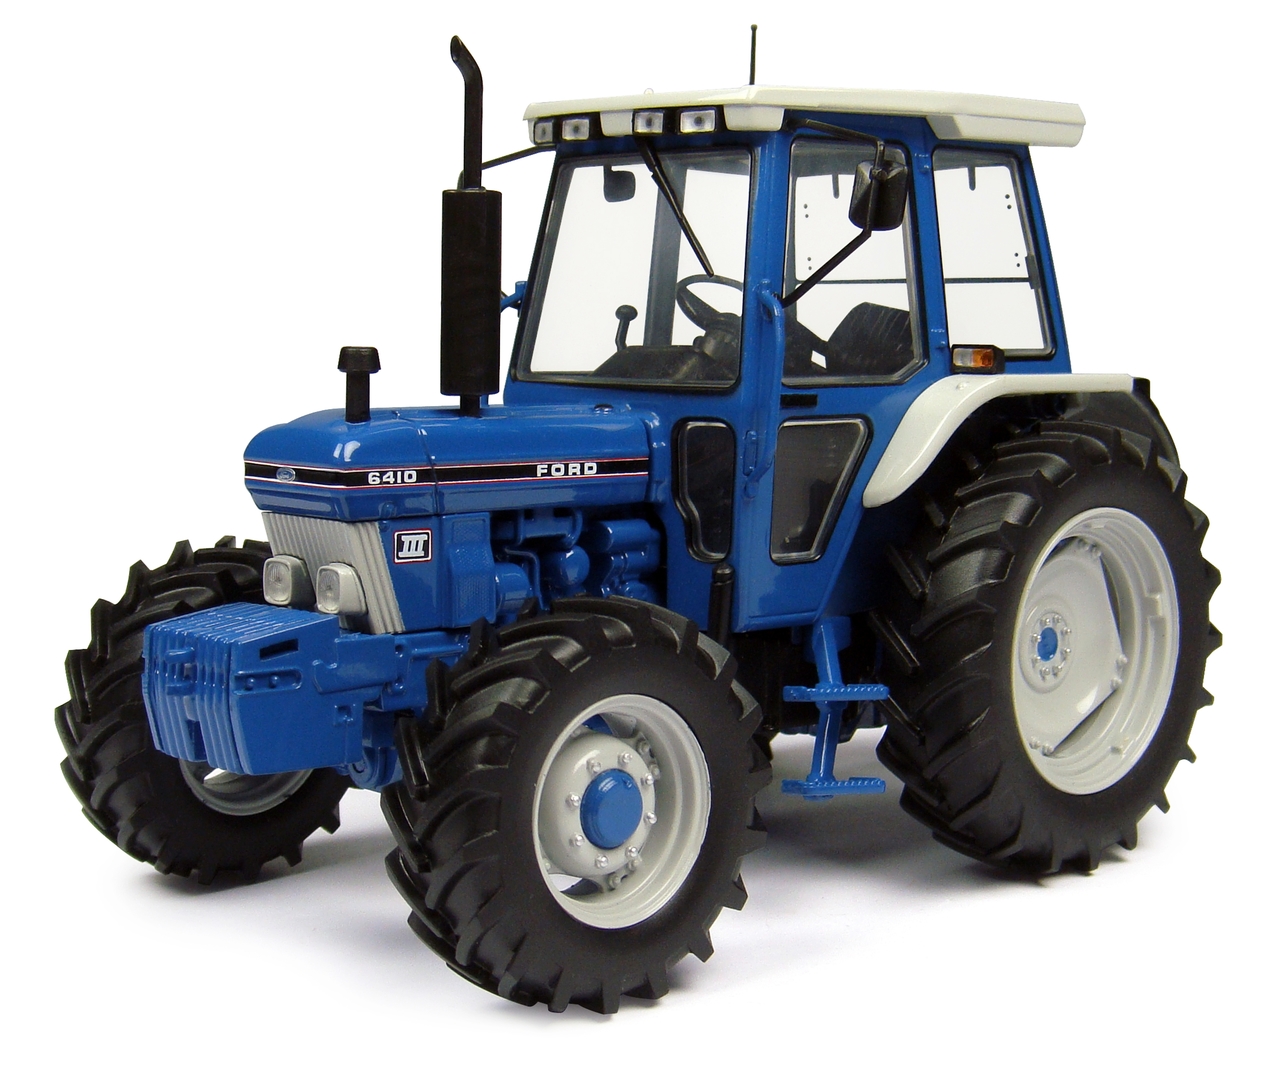 Ford 6410 4wd Generation Iii Tractor 1/32 Diecast Model By Universal Hobbies